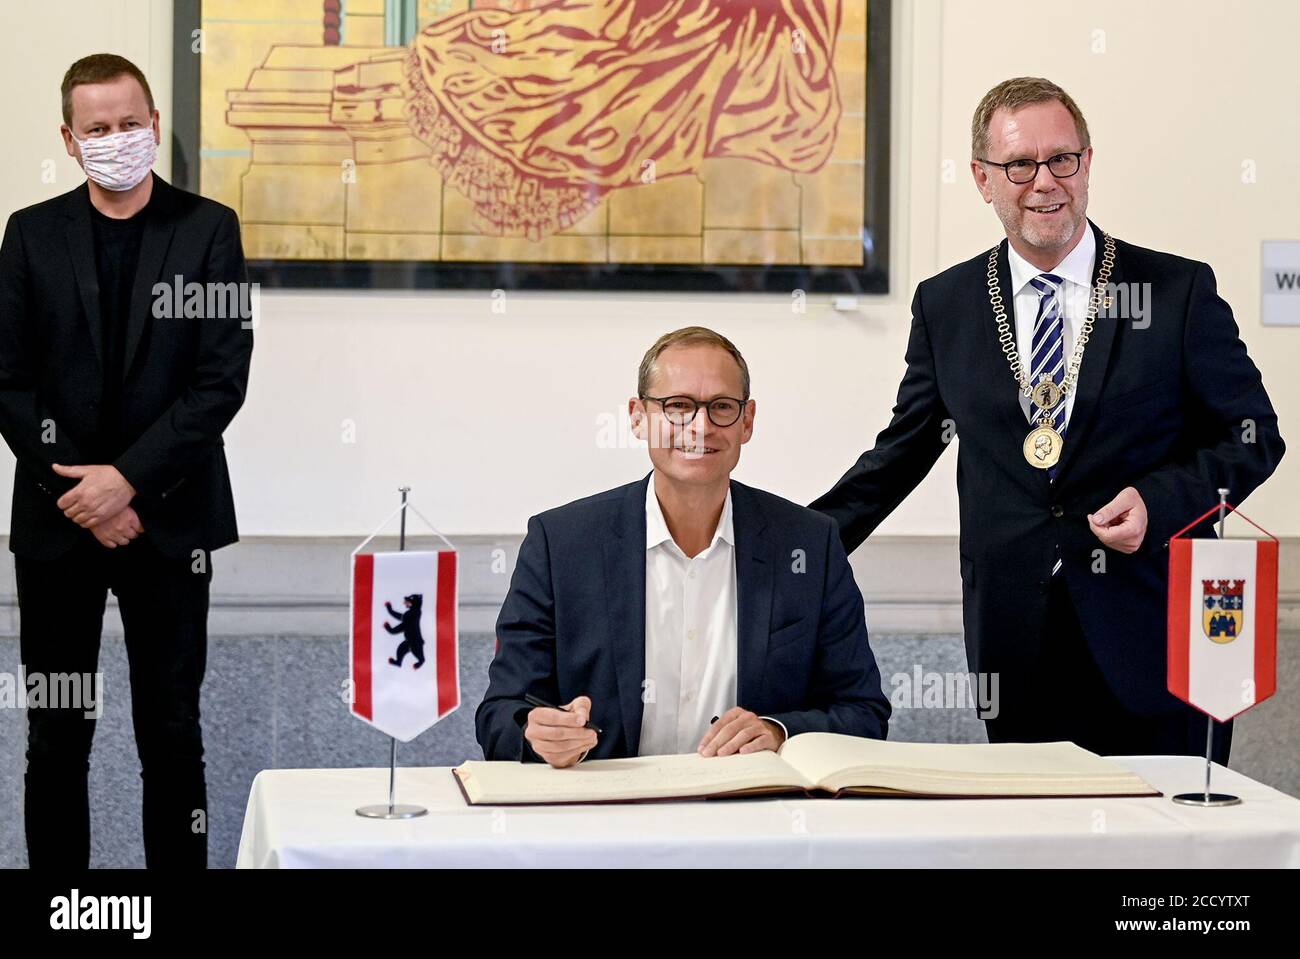 Berlin, Germany. 25th Aug, 2020. Michael Müller (SPD, m), Berlin's governing mayor, signs the district's book, while Reinhard Naumann (SPD, r), district mayor of Berlin's Charlottenburg-Wilmersdorf district, and Klaus Lederer (Die Linke), Berlin's Senator for Culture and Europe, stand behind him. Credit: Britta Pedersen/dpa-Zentralbild/dpa/Alamy Live News Stock Photo